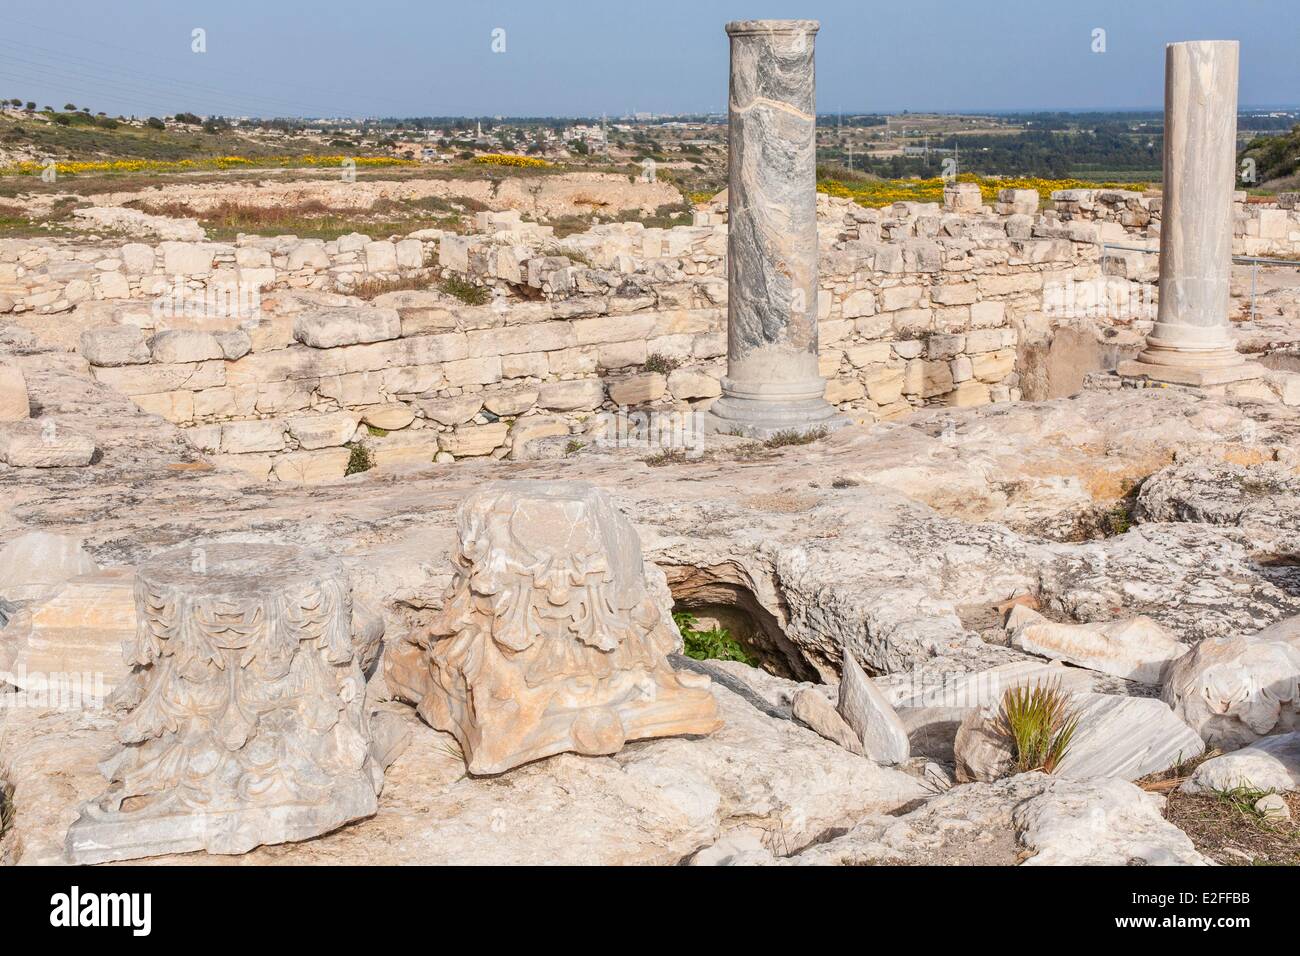 Cyprus, Limassol district, Episkopi, archaeological site of the ancient Greco-Roman city of Kourion Stock Photo